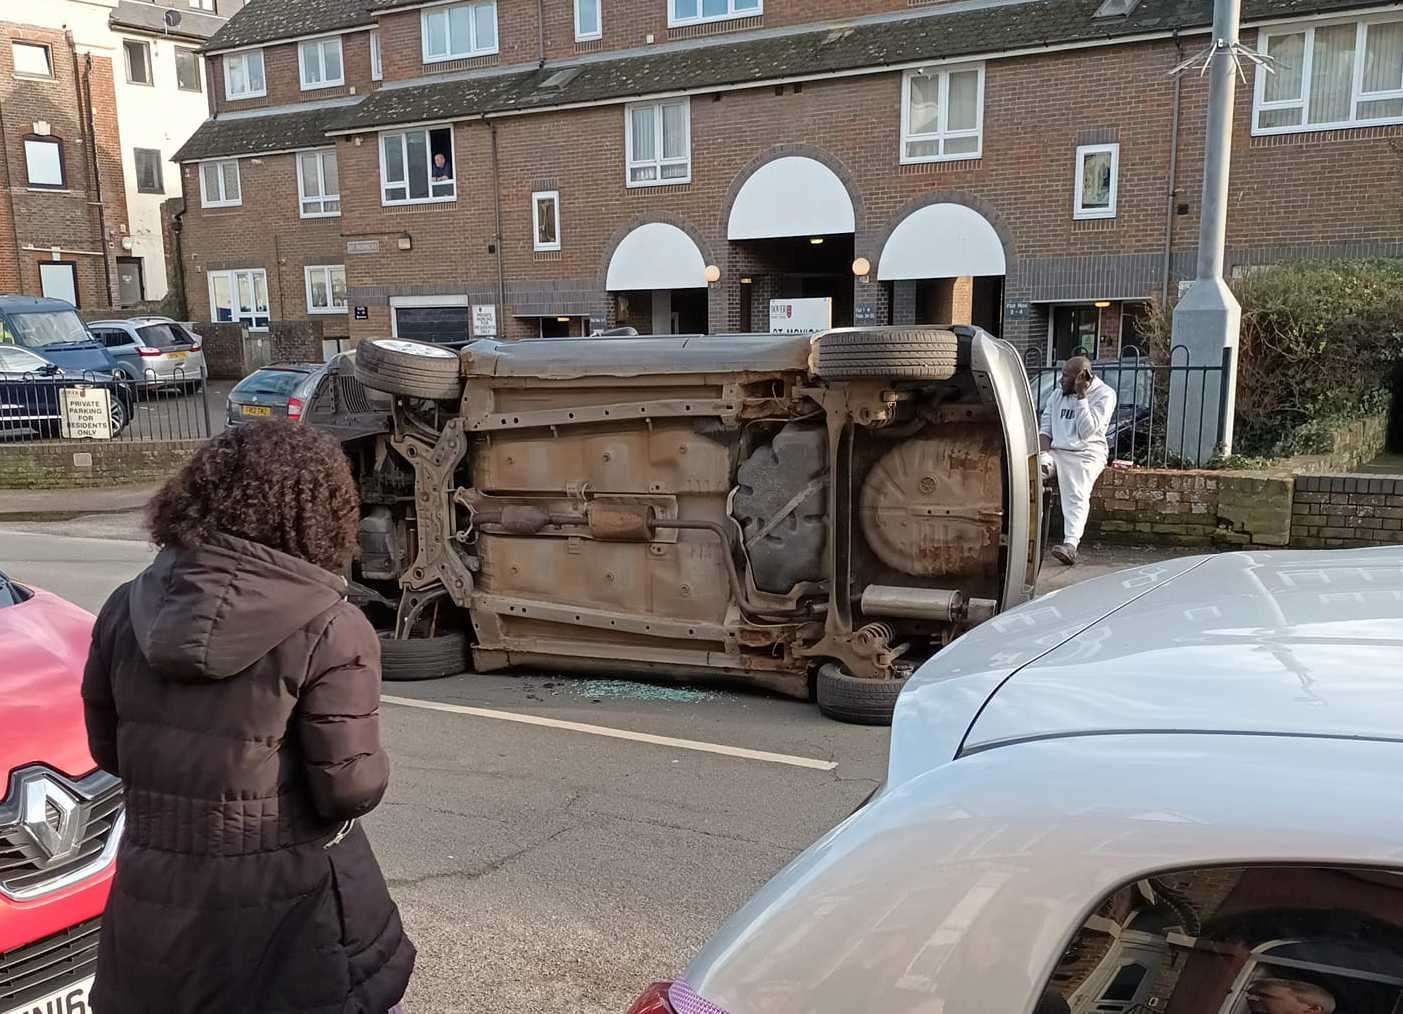 The car on its side just after the crash at Folkestone Road, Dover. bystander looks on